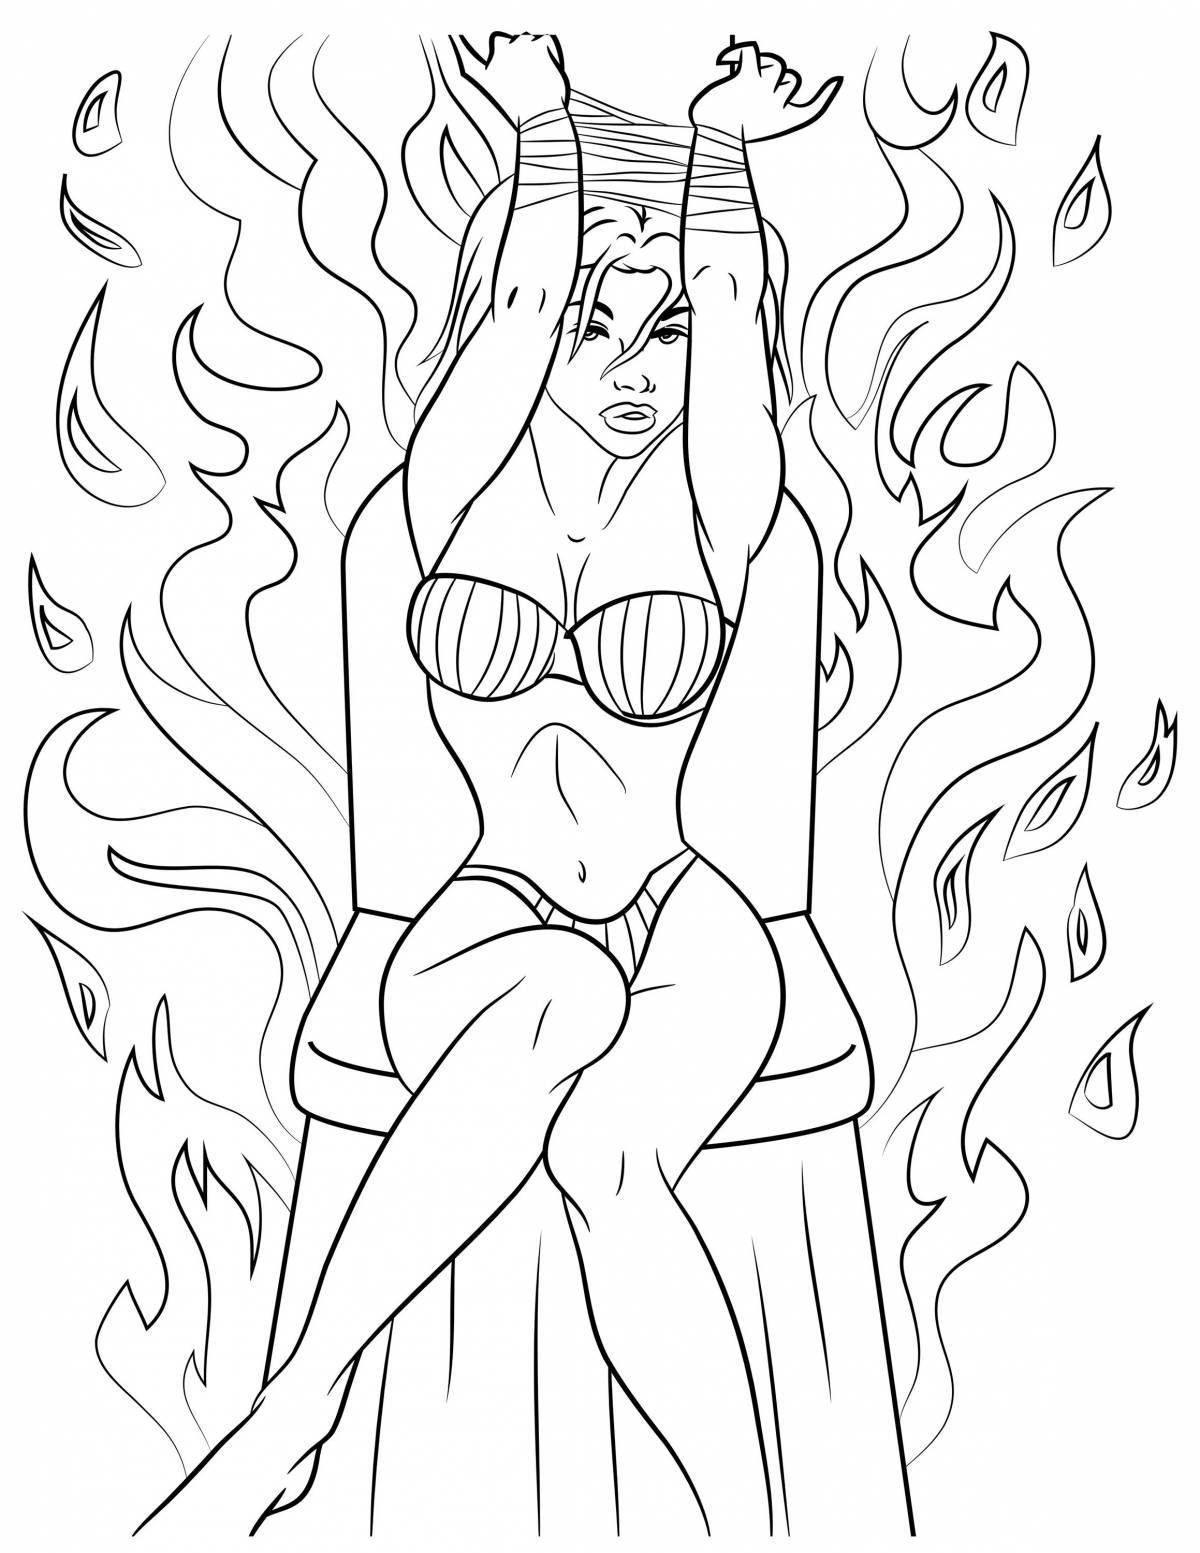 Intense adult porn coloring page